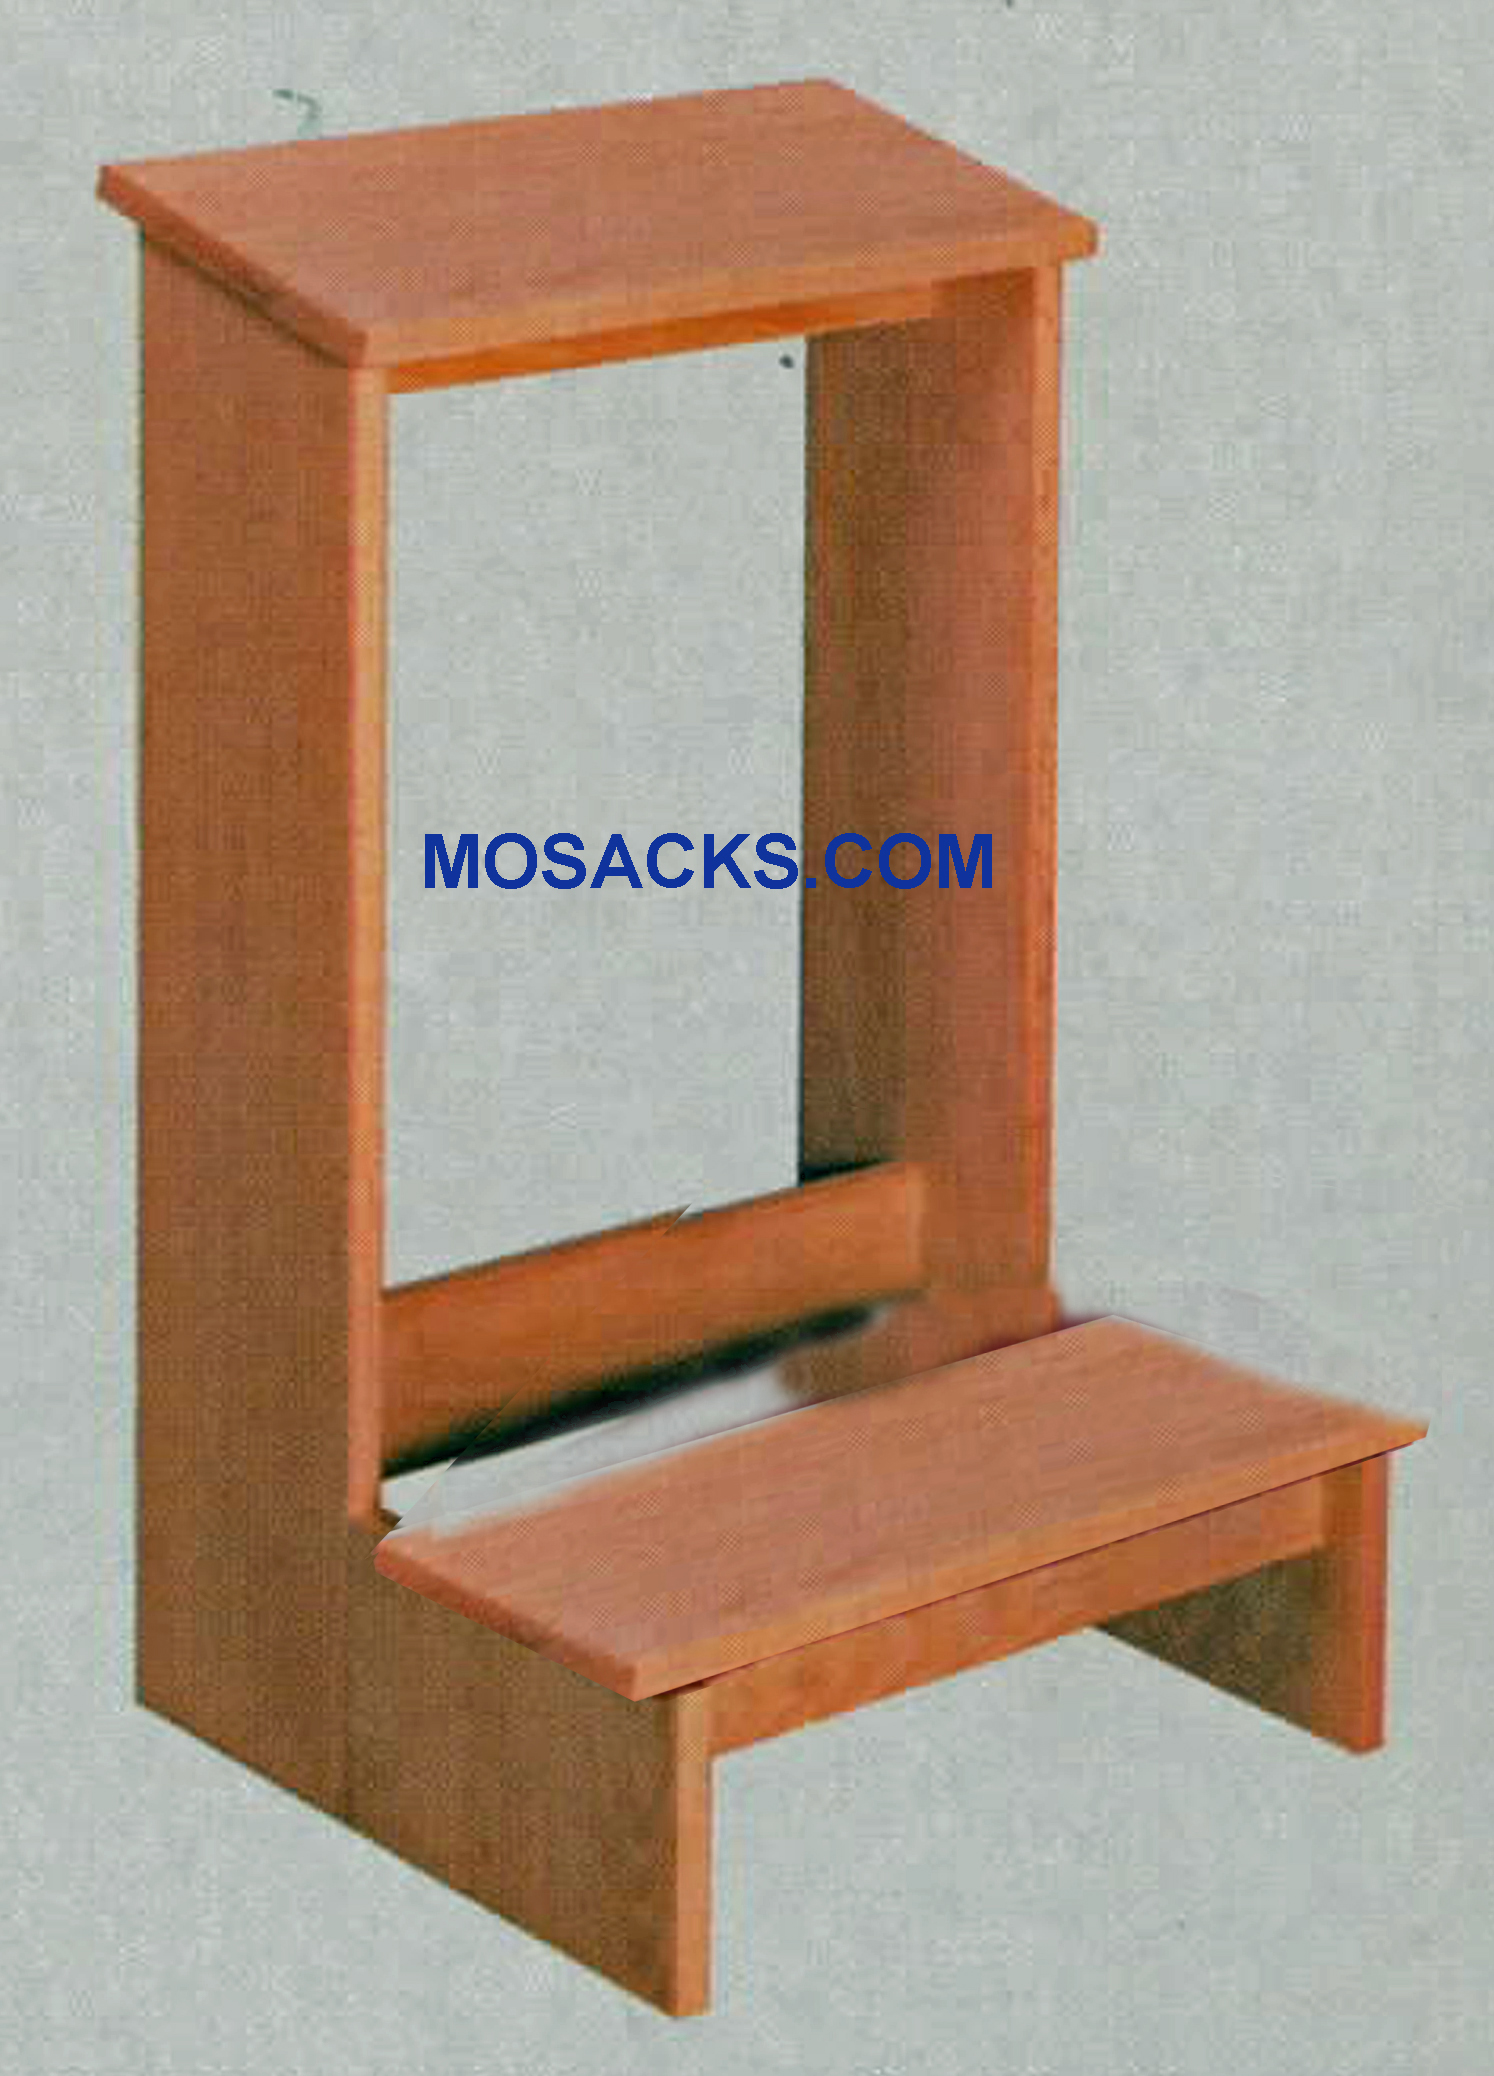 Unfinished W Brand Prie Dieu Kneeler with shelf 19" w x 19" d x 30" h #2303. This Prie Dieu Kneeler is unfinished with a wood kneeler and a slanted shelf for arm comfort.  Unfinished Prie Dieu Church Kneeler #2303